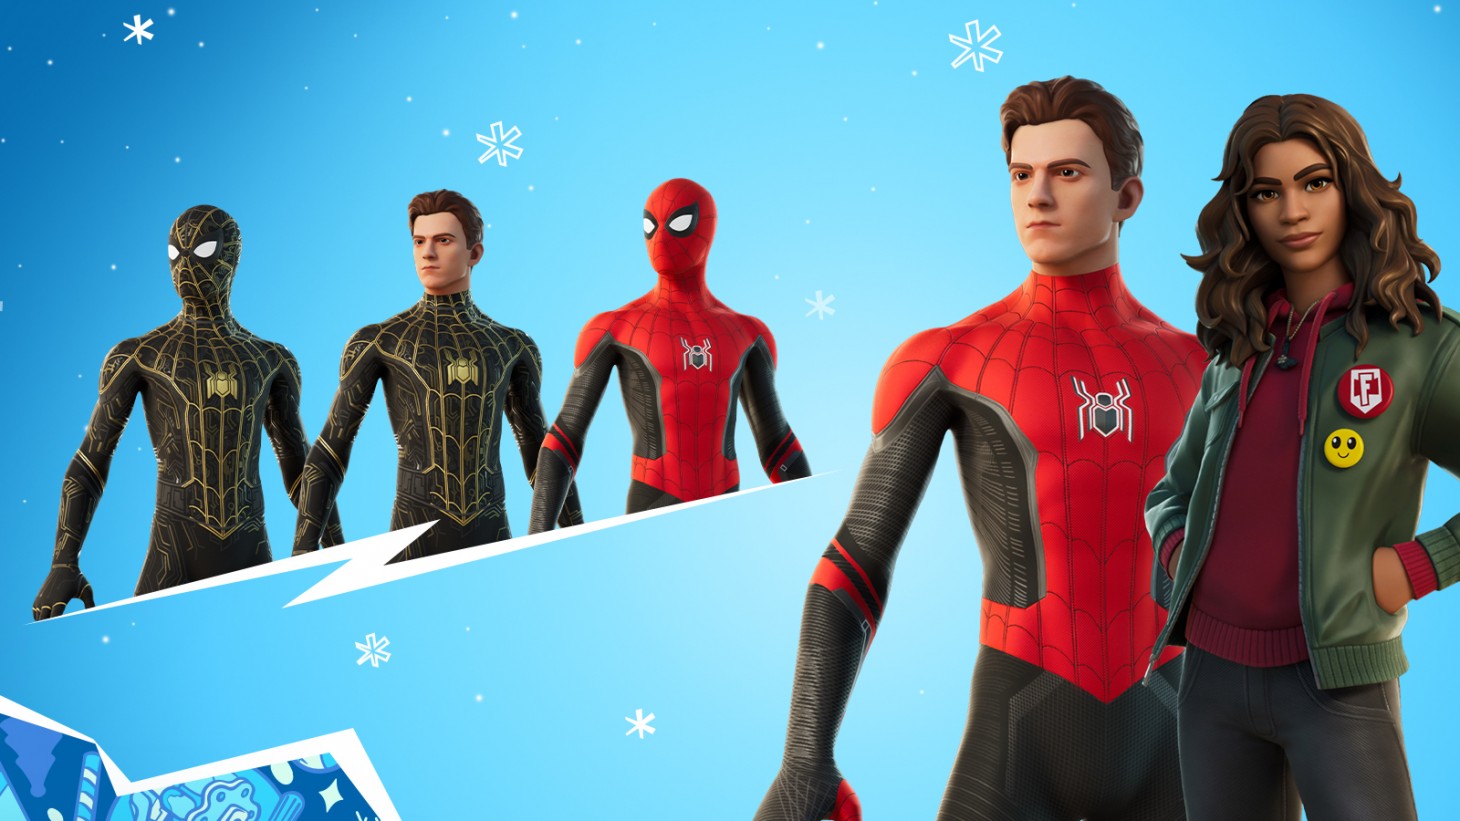 FORTNITE 2021 WINTERFEST Is Now Live With Spider-Man and MJ From No Way Home Joining The Item Shop